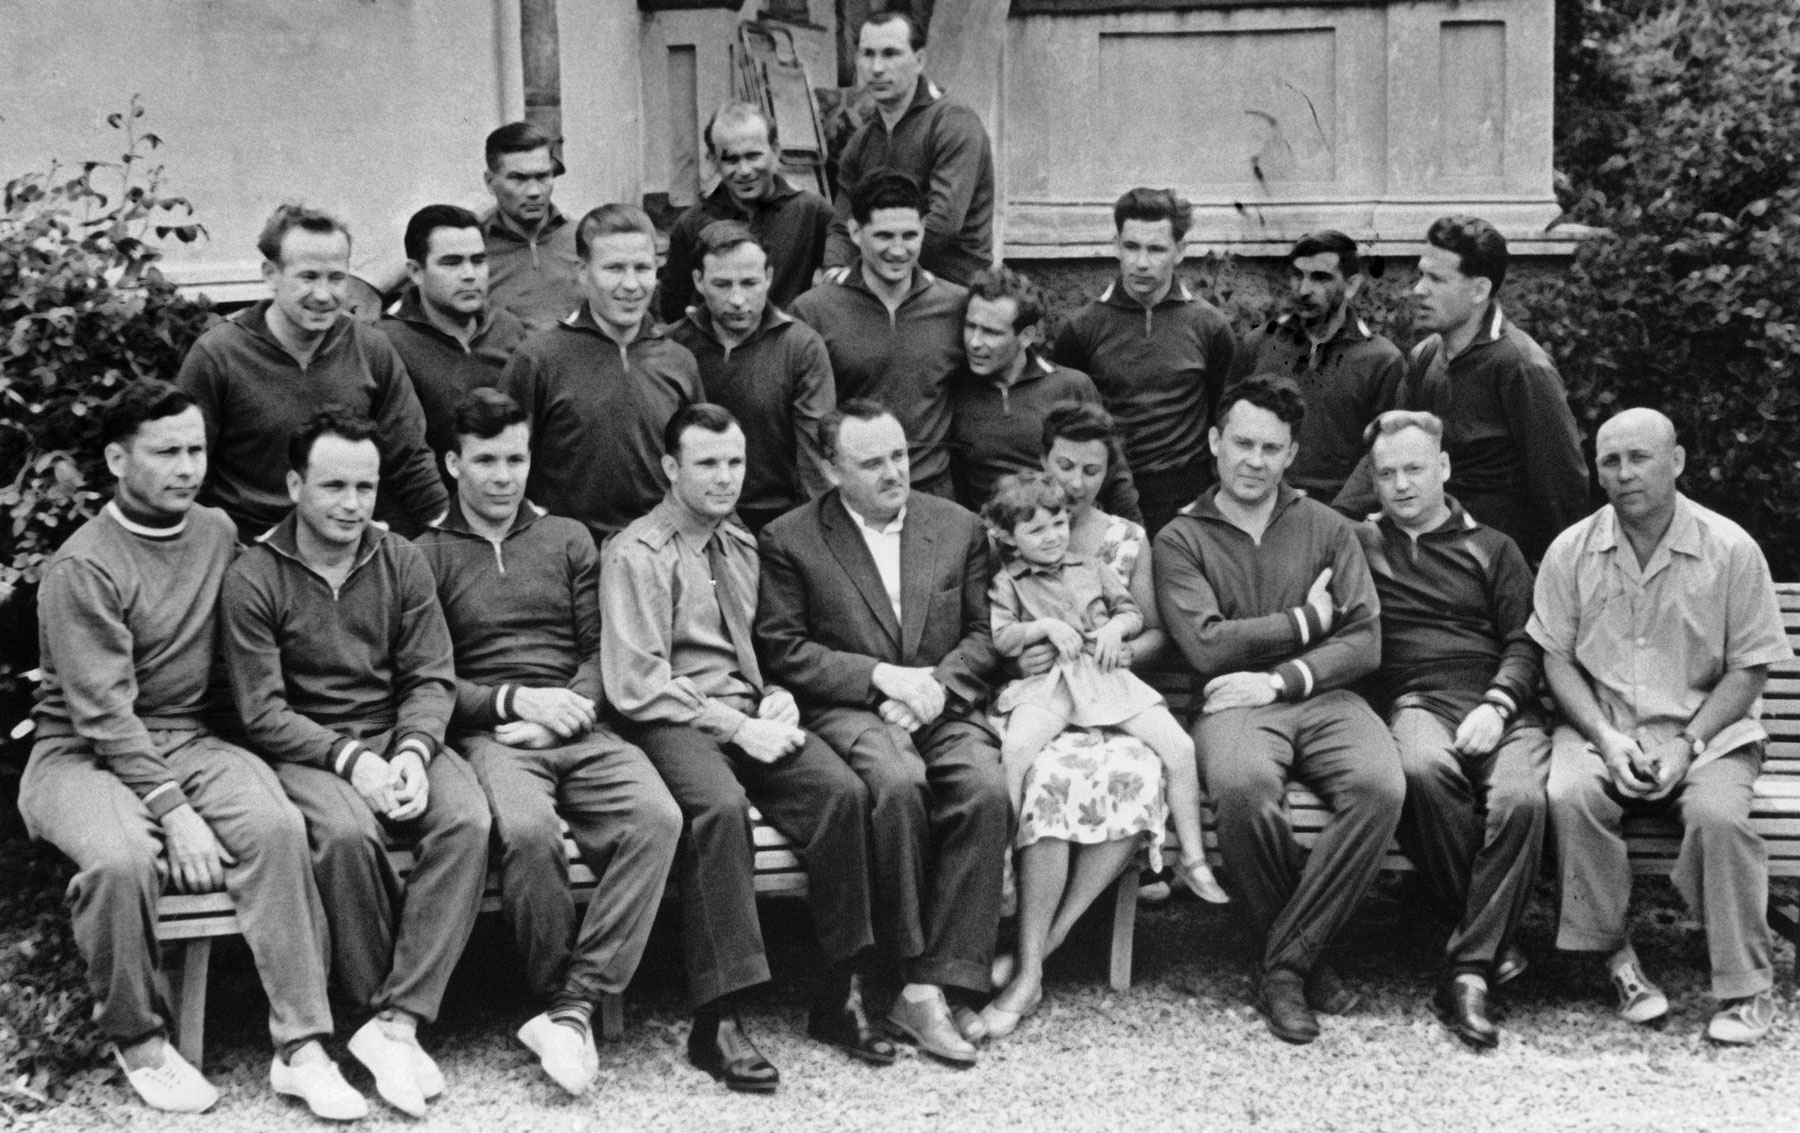 The first 20 Soviet Cosmonauts. Yuri Gagarin is sitting to the left of Sergei Korolev the Chief Designer of the Soviet space programme.